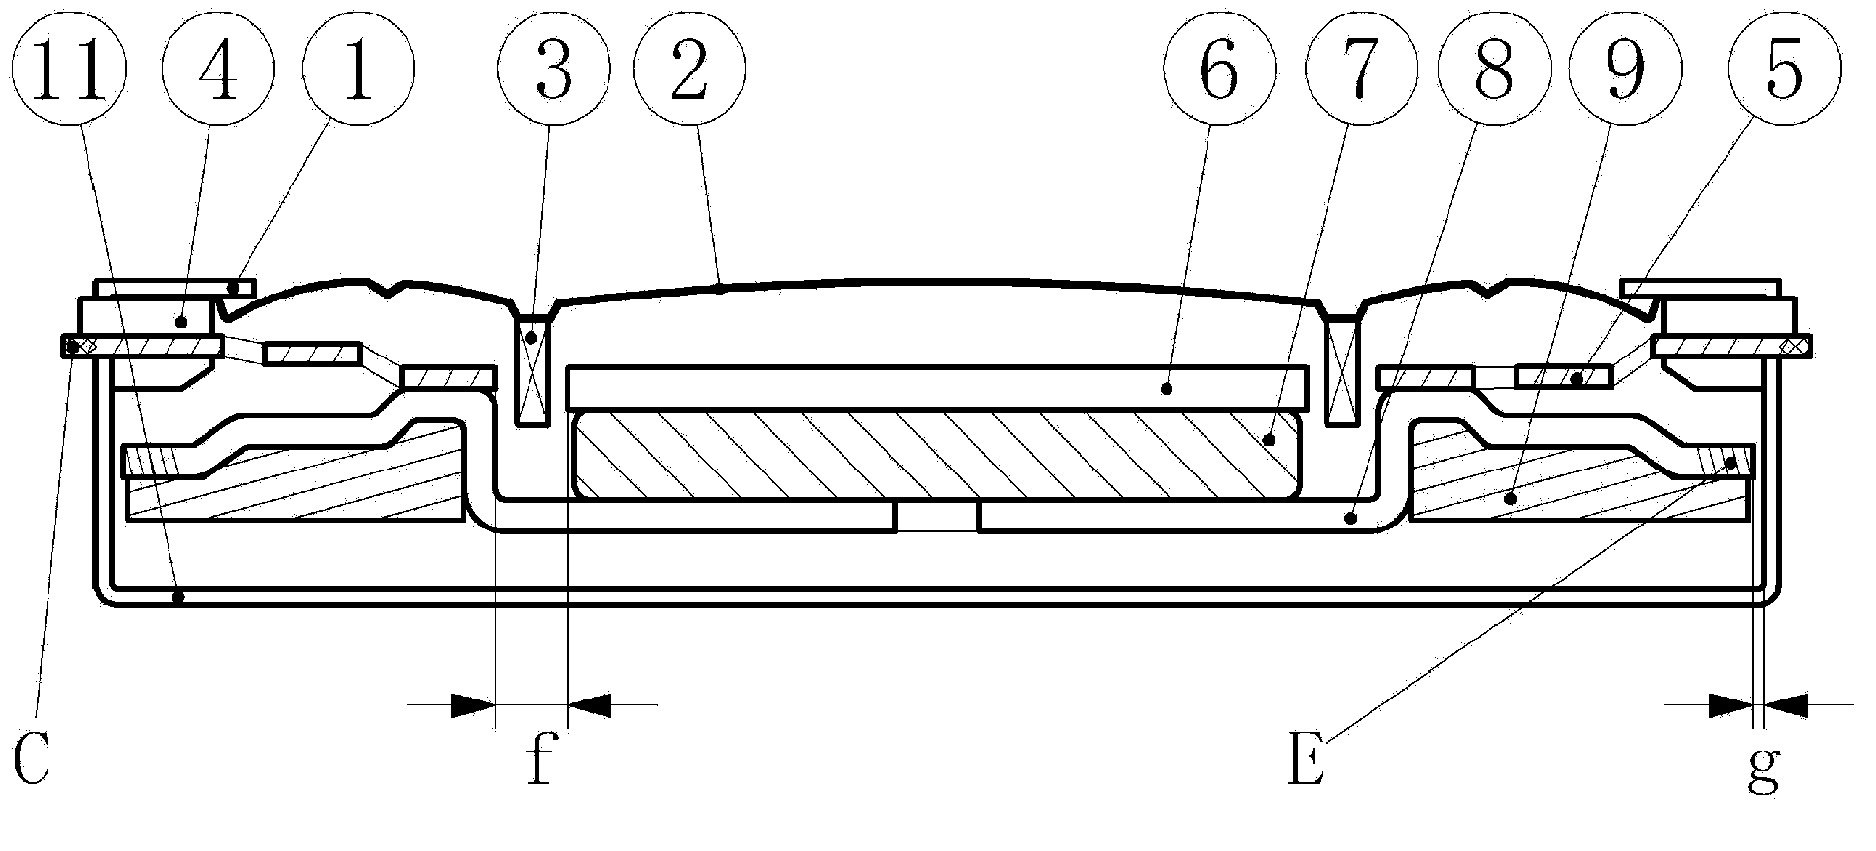 Load-resisting structure of multifunctional vibration actuator